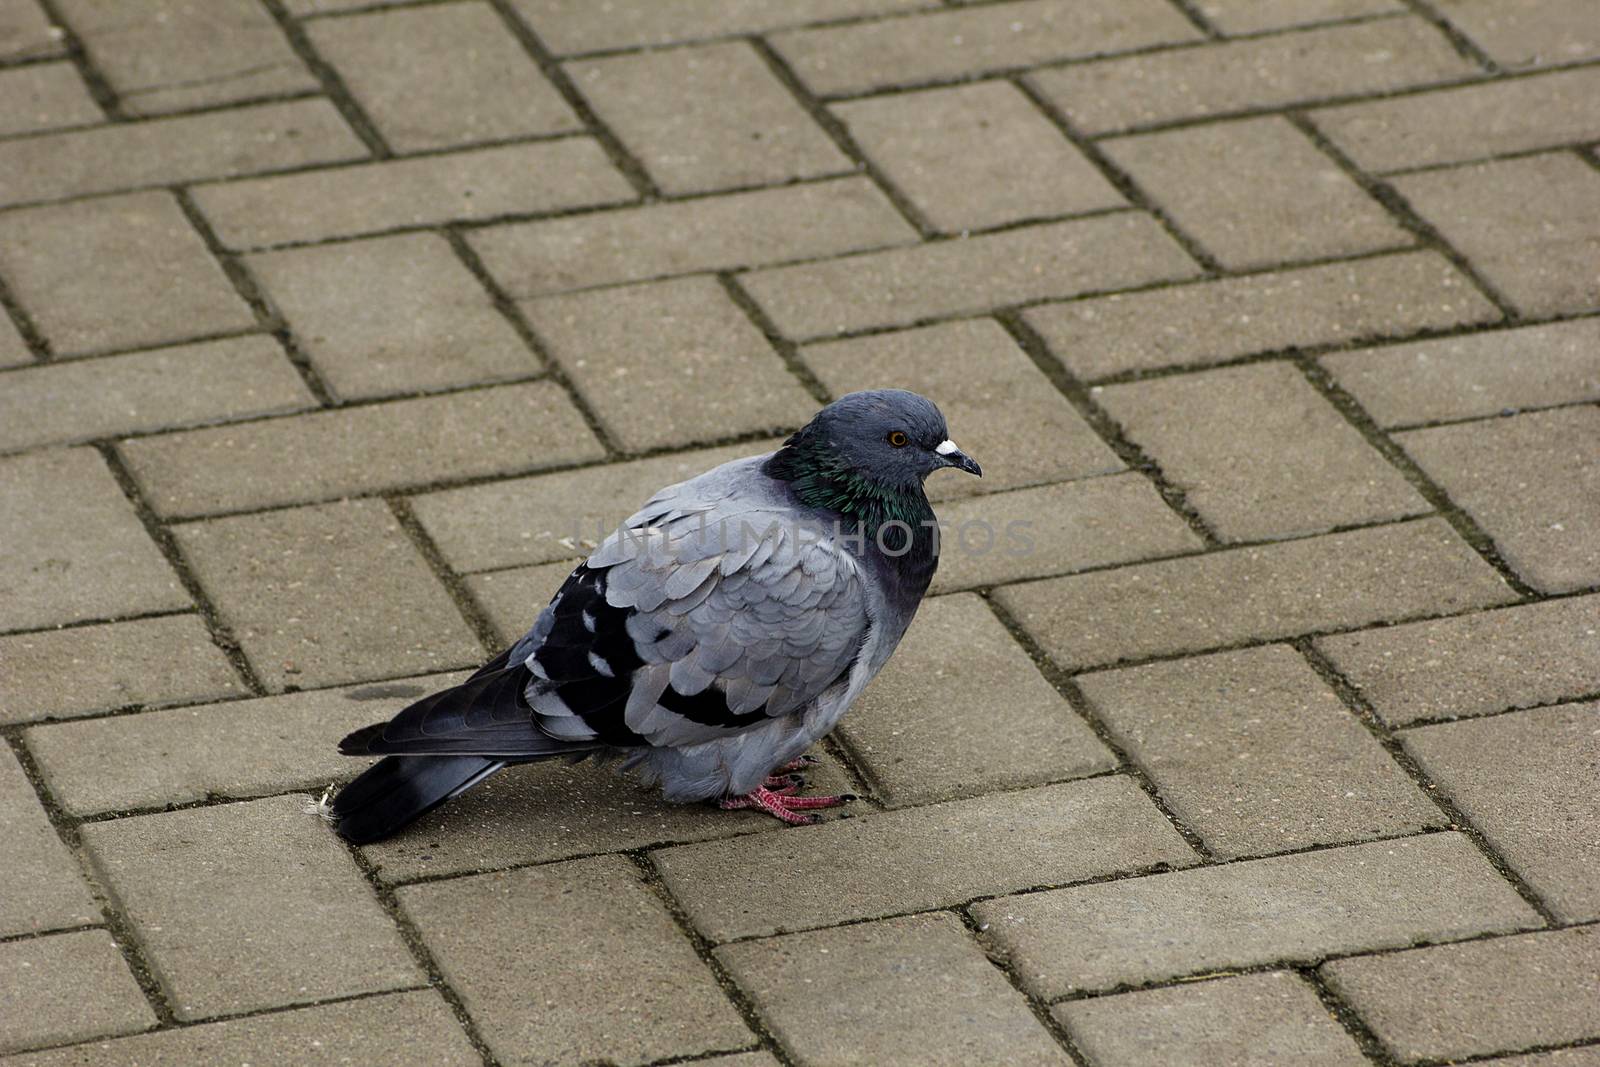 Blue dove on the background of paving slabs.